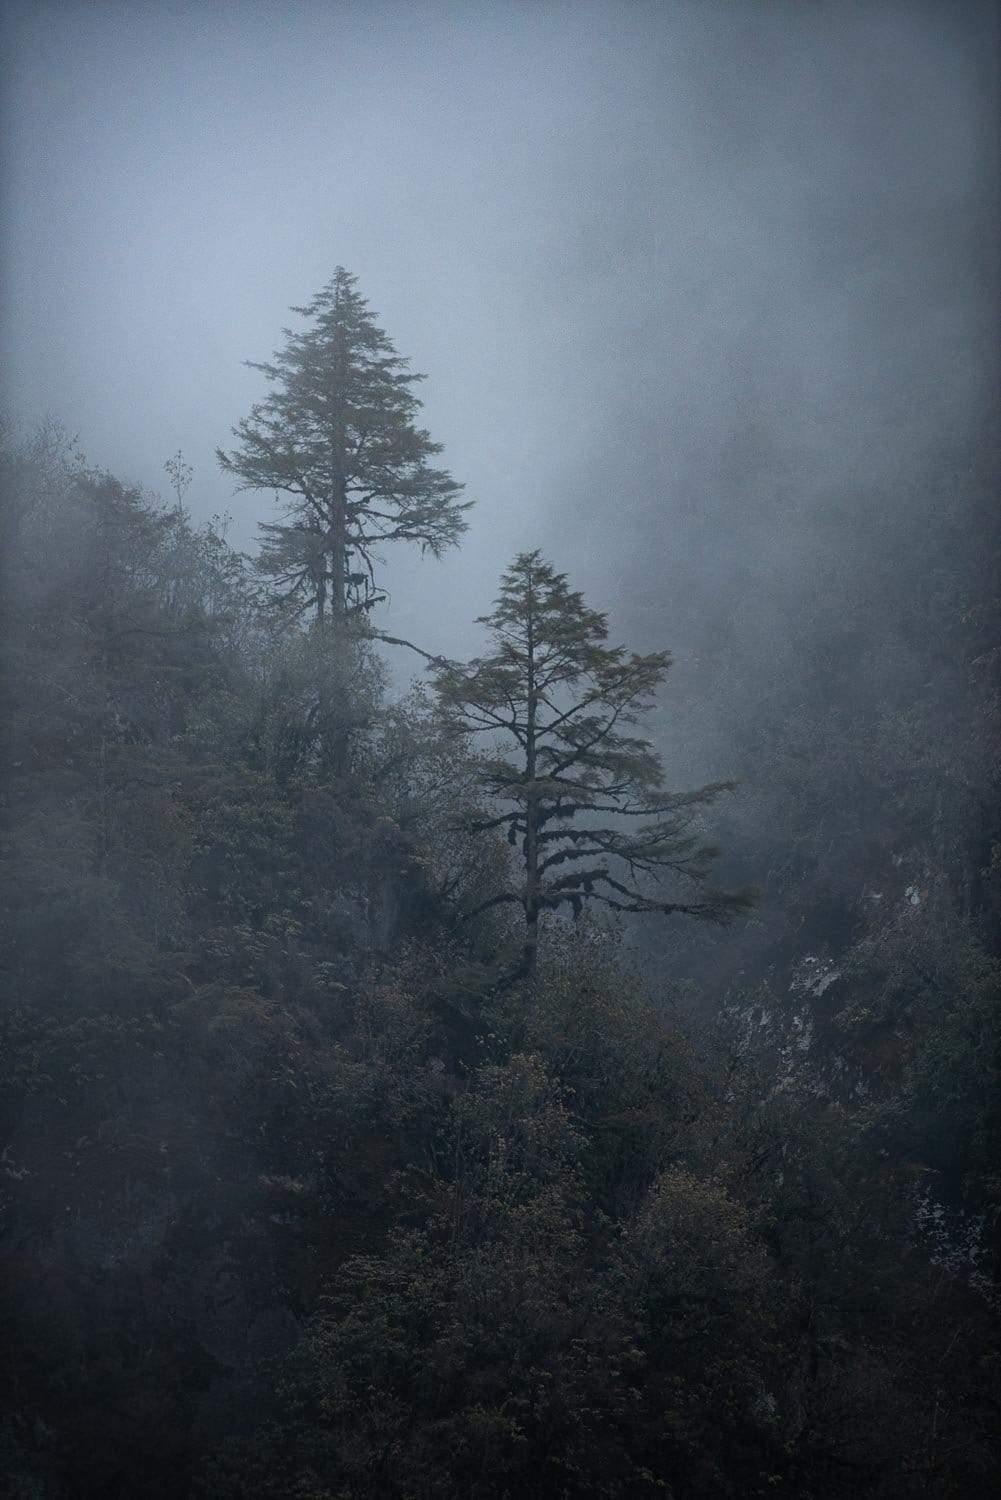 Portrait view of a dark forest with 2 trees standing tall and a foggy effect in the background, Black Forest #3, Bhutan